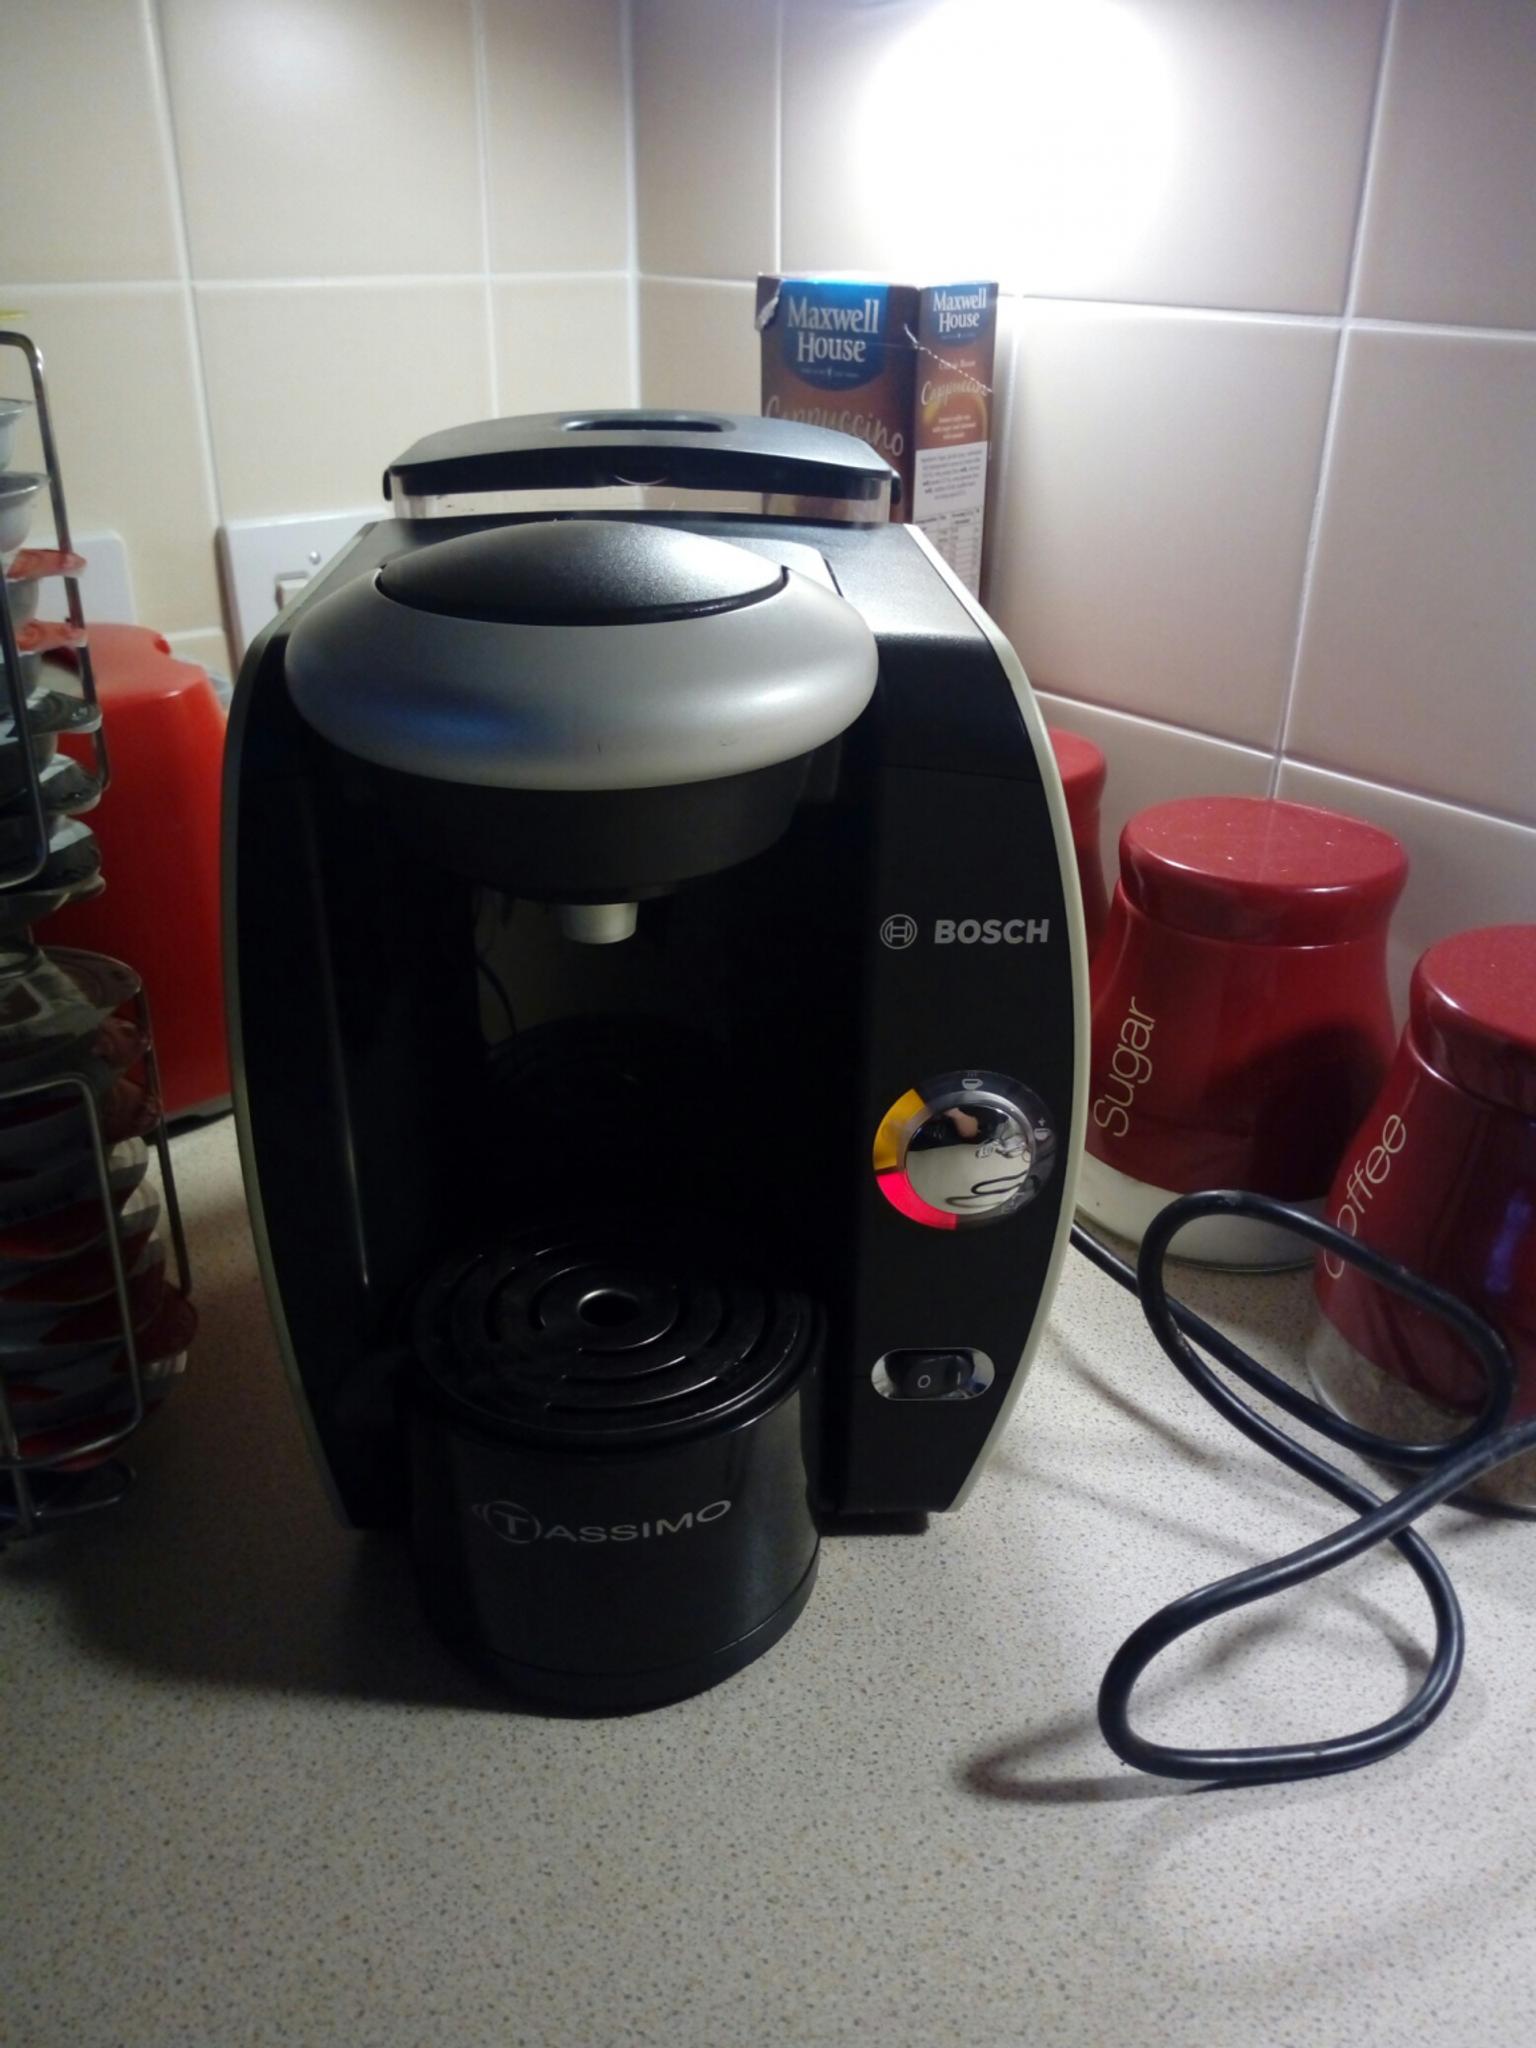 Bosch Tassimo Coffee Machine In Wf15 Kirklees For 20 00 For Sale